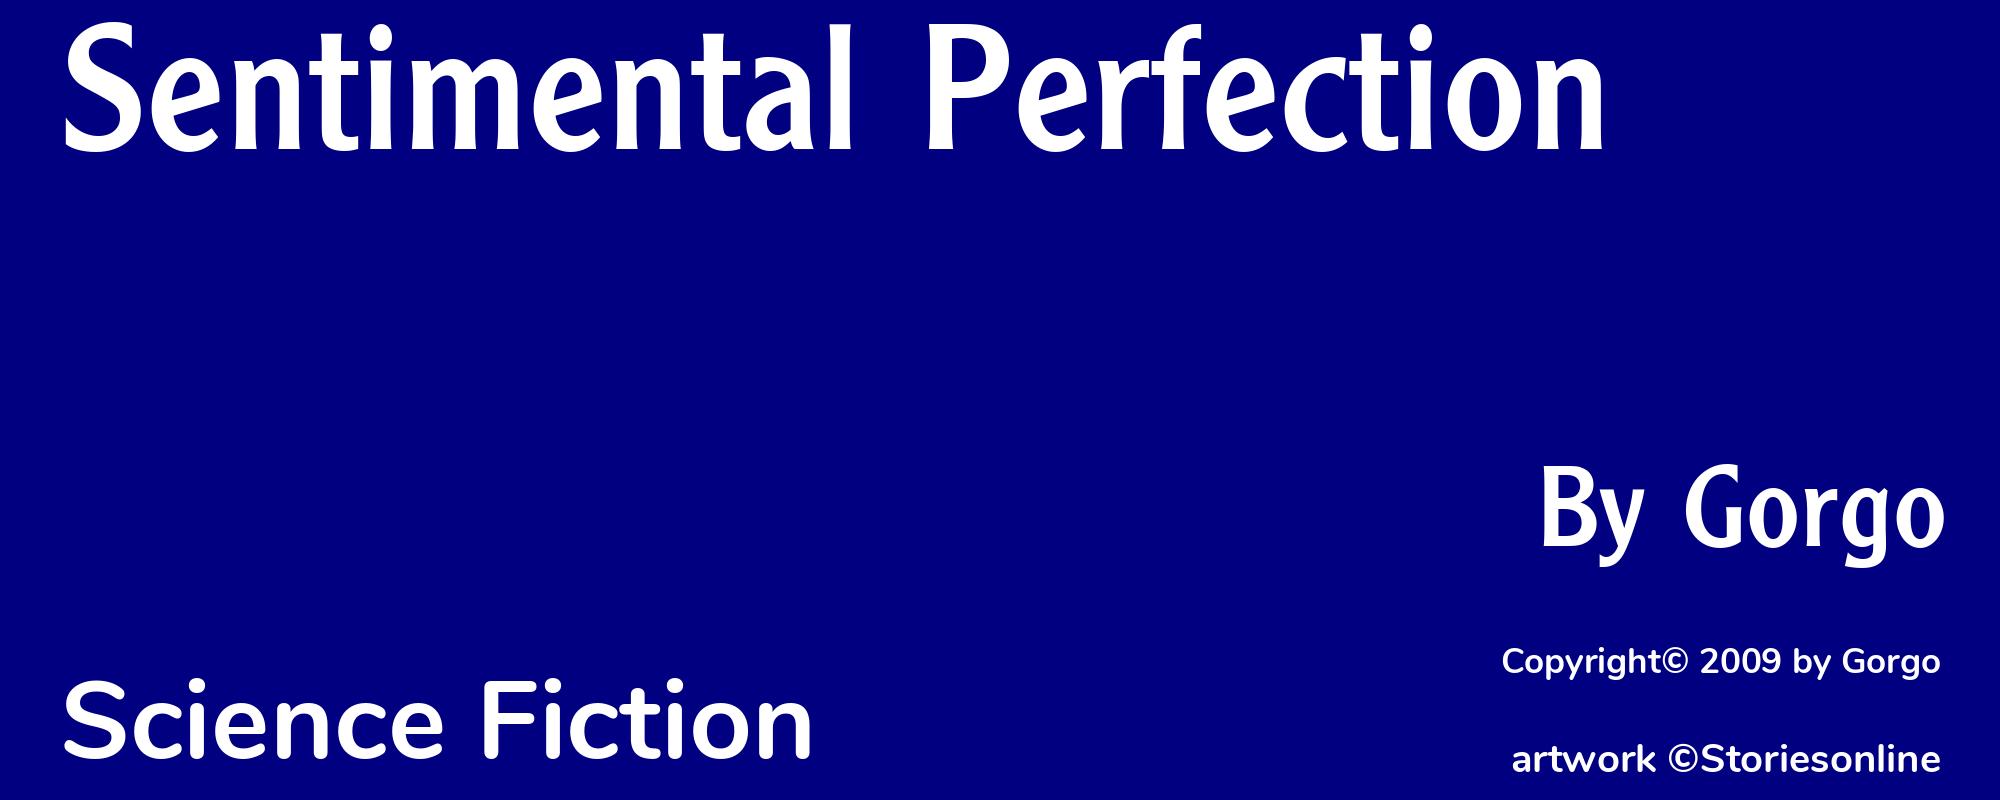 Sentimental Perfection - Cover